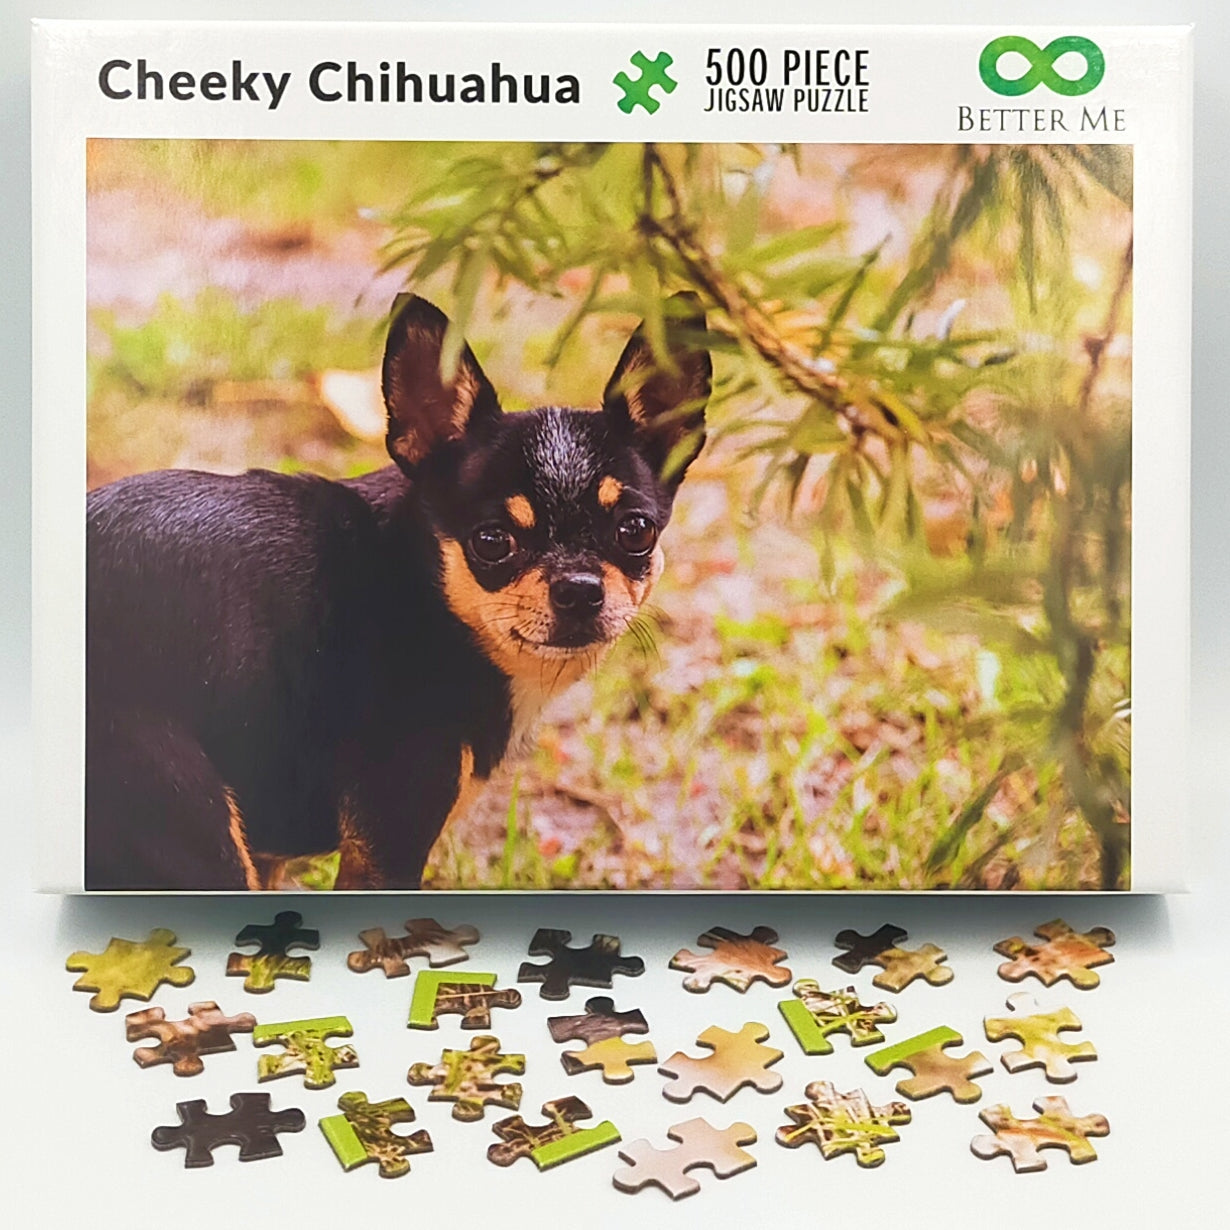 Prank Puzzle - Cheeky Chihuahua 500 Piece puzzle. Prank Gift Pooping Dogs Puzzle